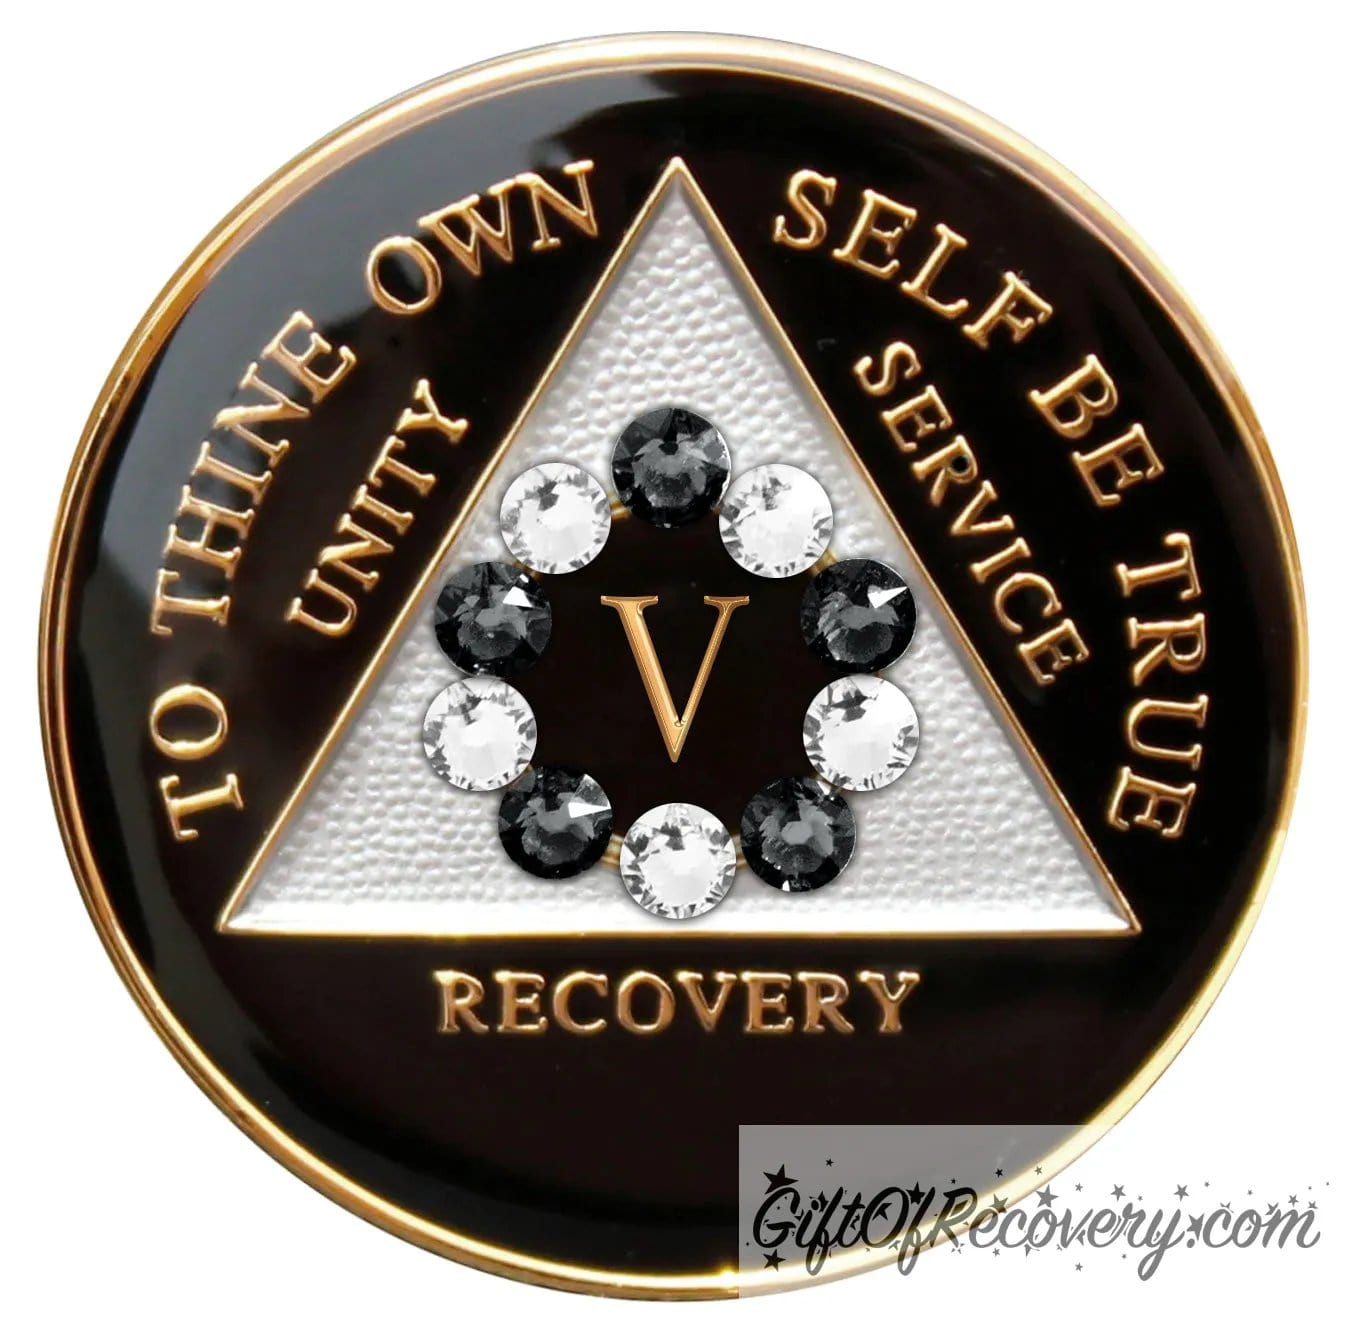 5 year black onyx 10th step AA medallion, with 10 genuine crystals, emphasizing action and reflection, triangle and lettering embossed in 14k gold. 